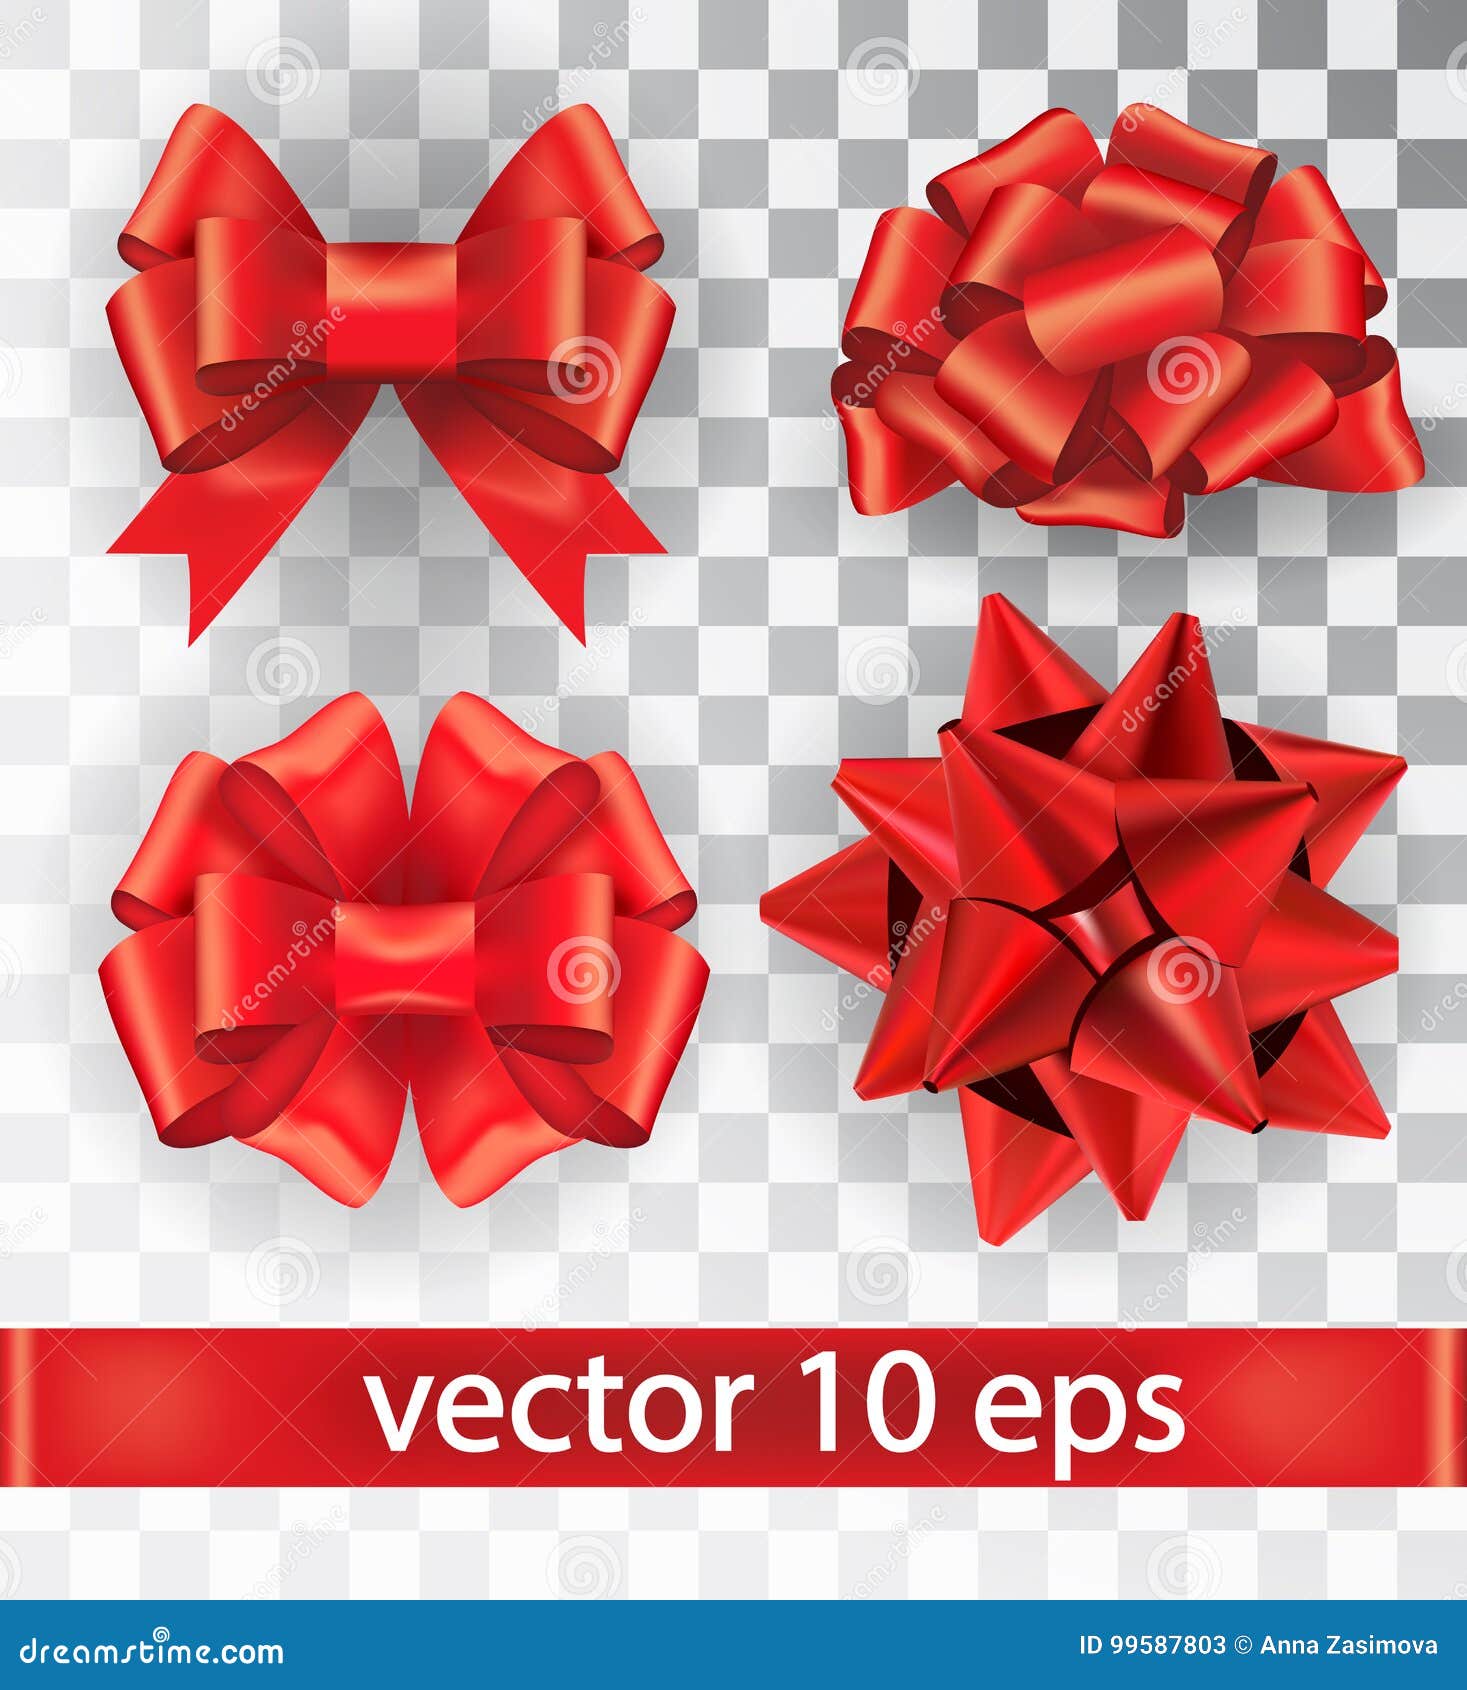 red bows for decoration or gifts, Stock vector